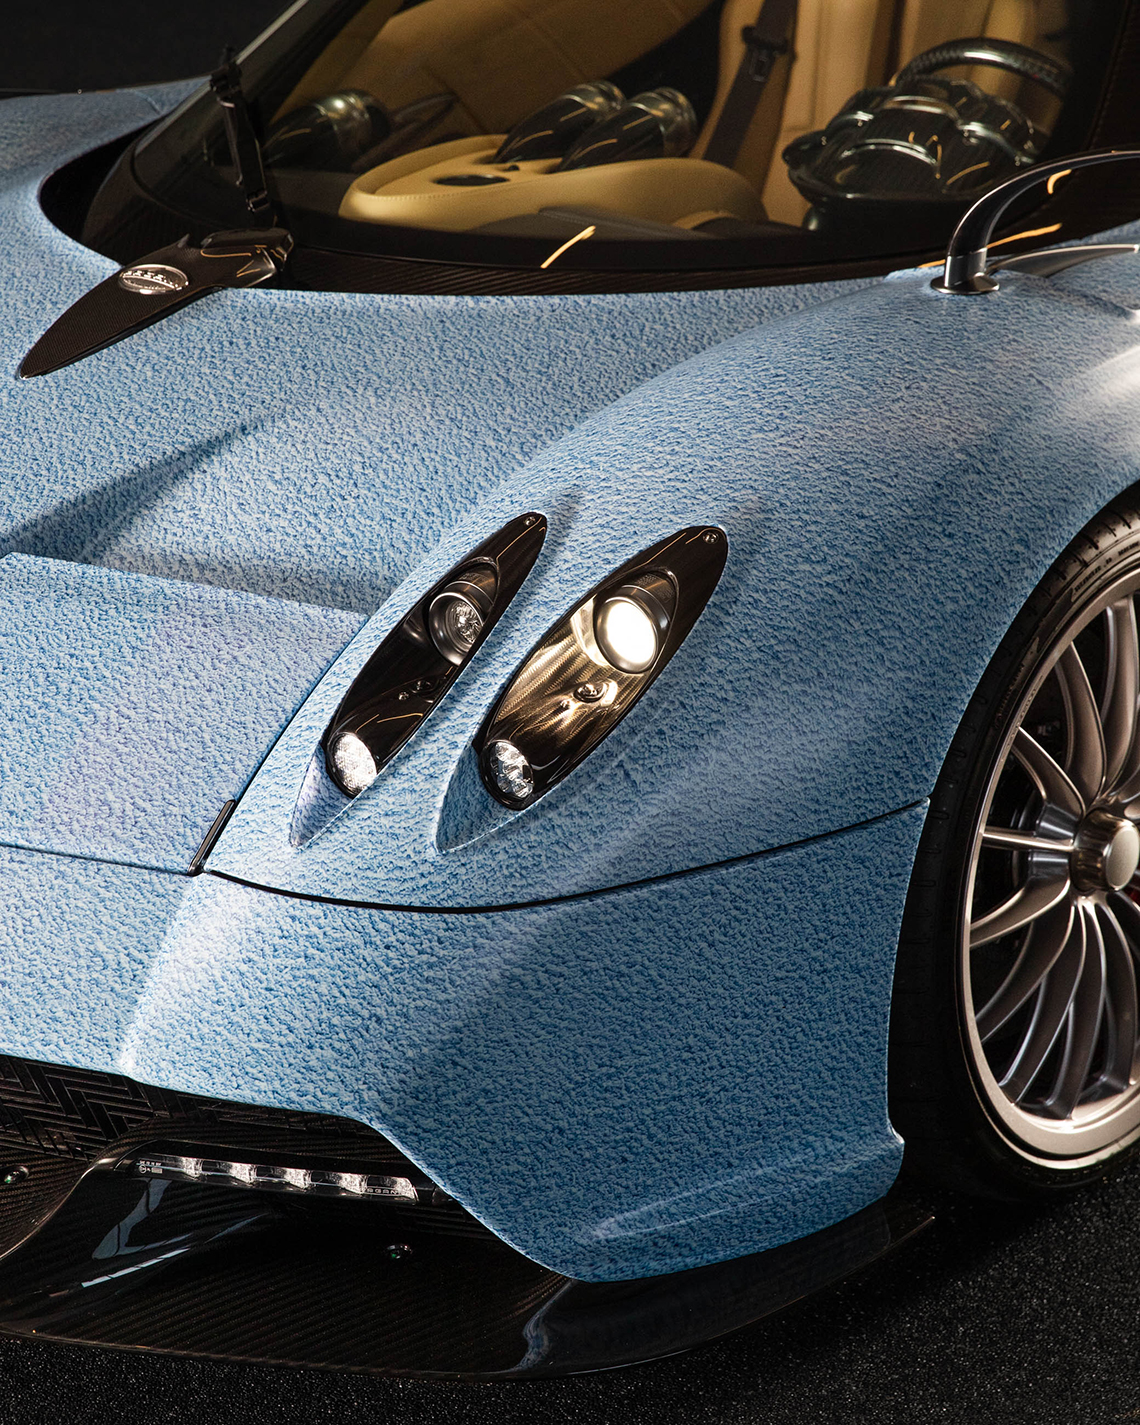 Limited Edition Pagani Inspired by New Nike Air Jordan 4 University Blue  Sneakers - Billionaire Toys